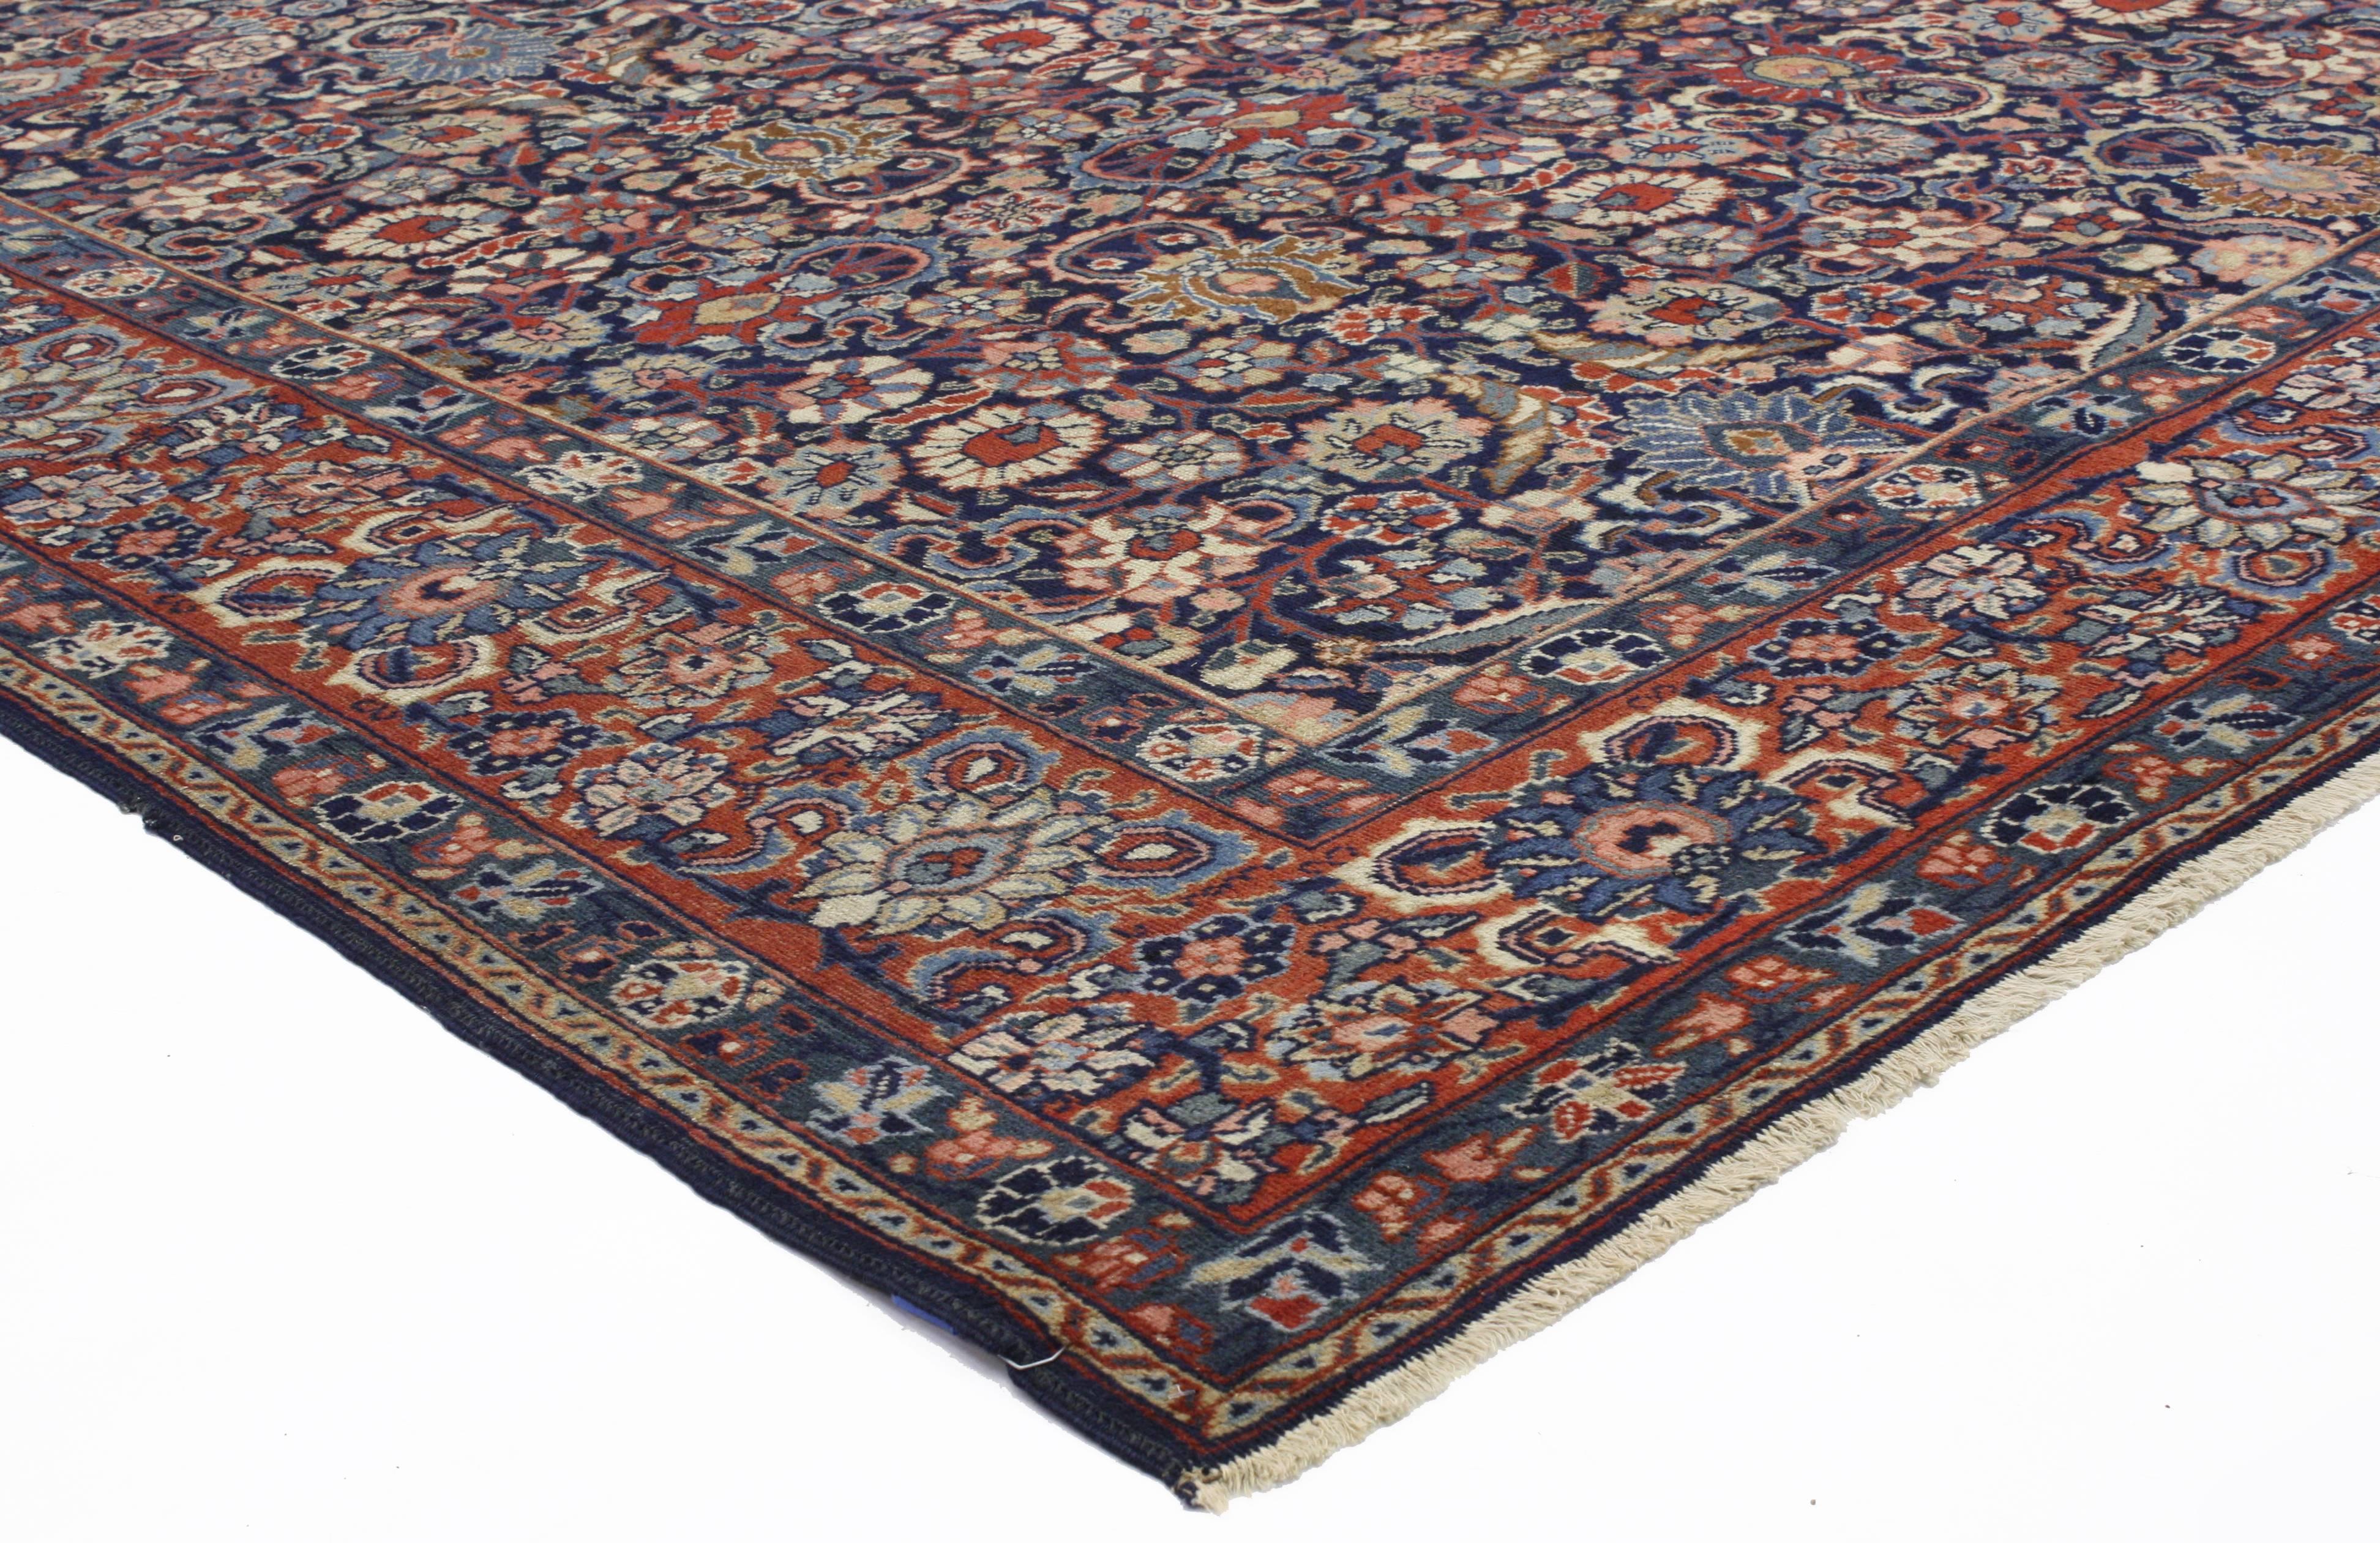 72860 Antique Persian Tabriz Rug with Traditional Style. Opulent blue and red tones enrich the lustrous composition of this grandeur antique Persian Tabriz rug. The traditional colors and allover floral design delivers an essence of great energy.